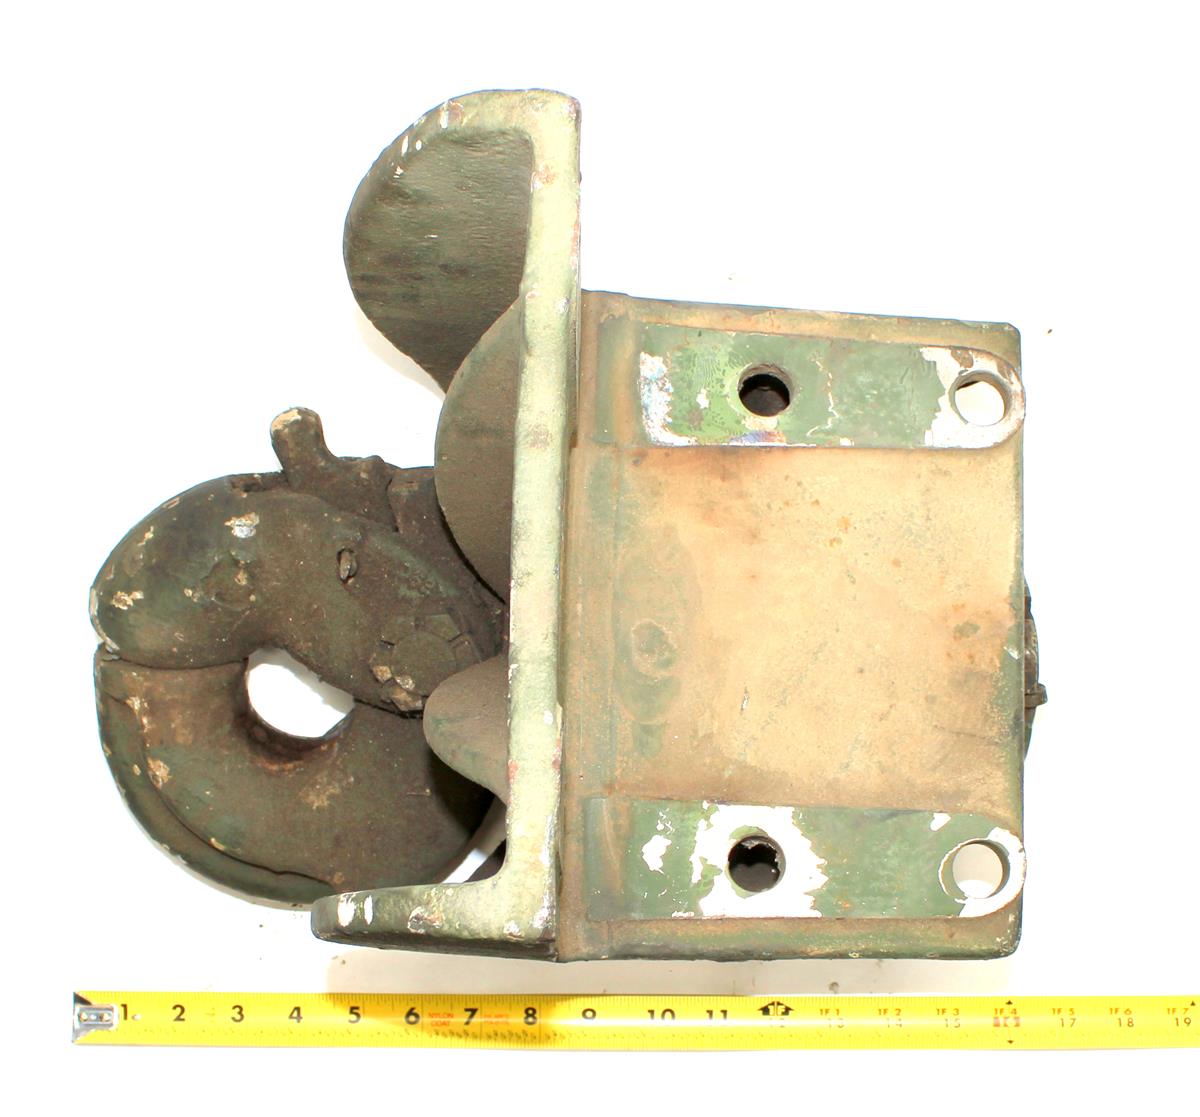 5T-2133  | 5T-2133 Pintle Hitch Assembly with Mounting Bracket M809 M939 M939A1 M939A2 (2).JPG